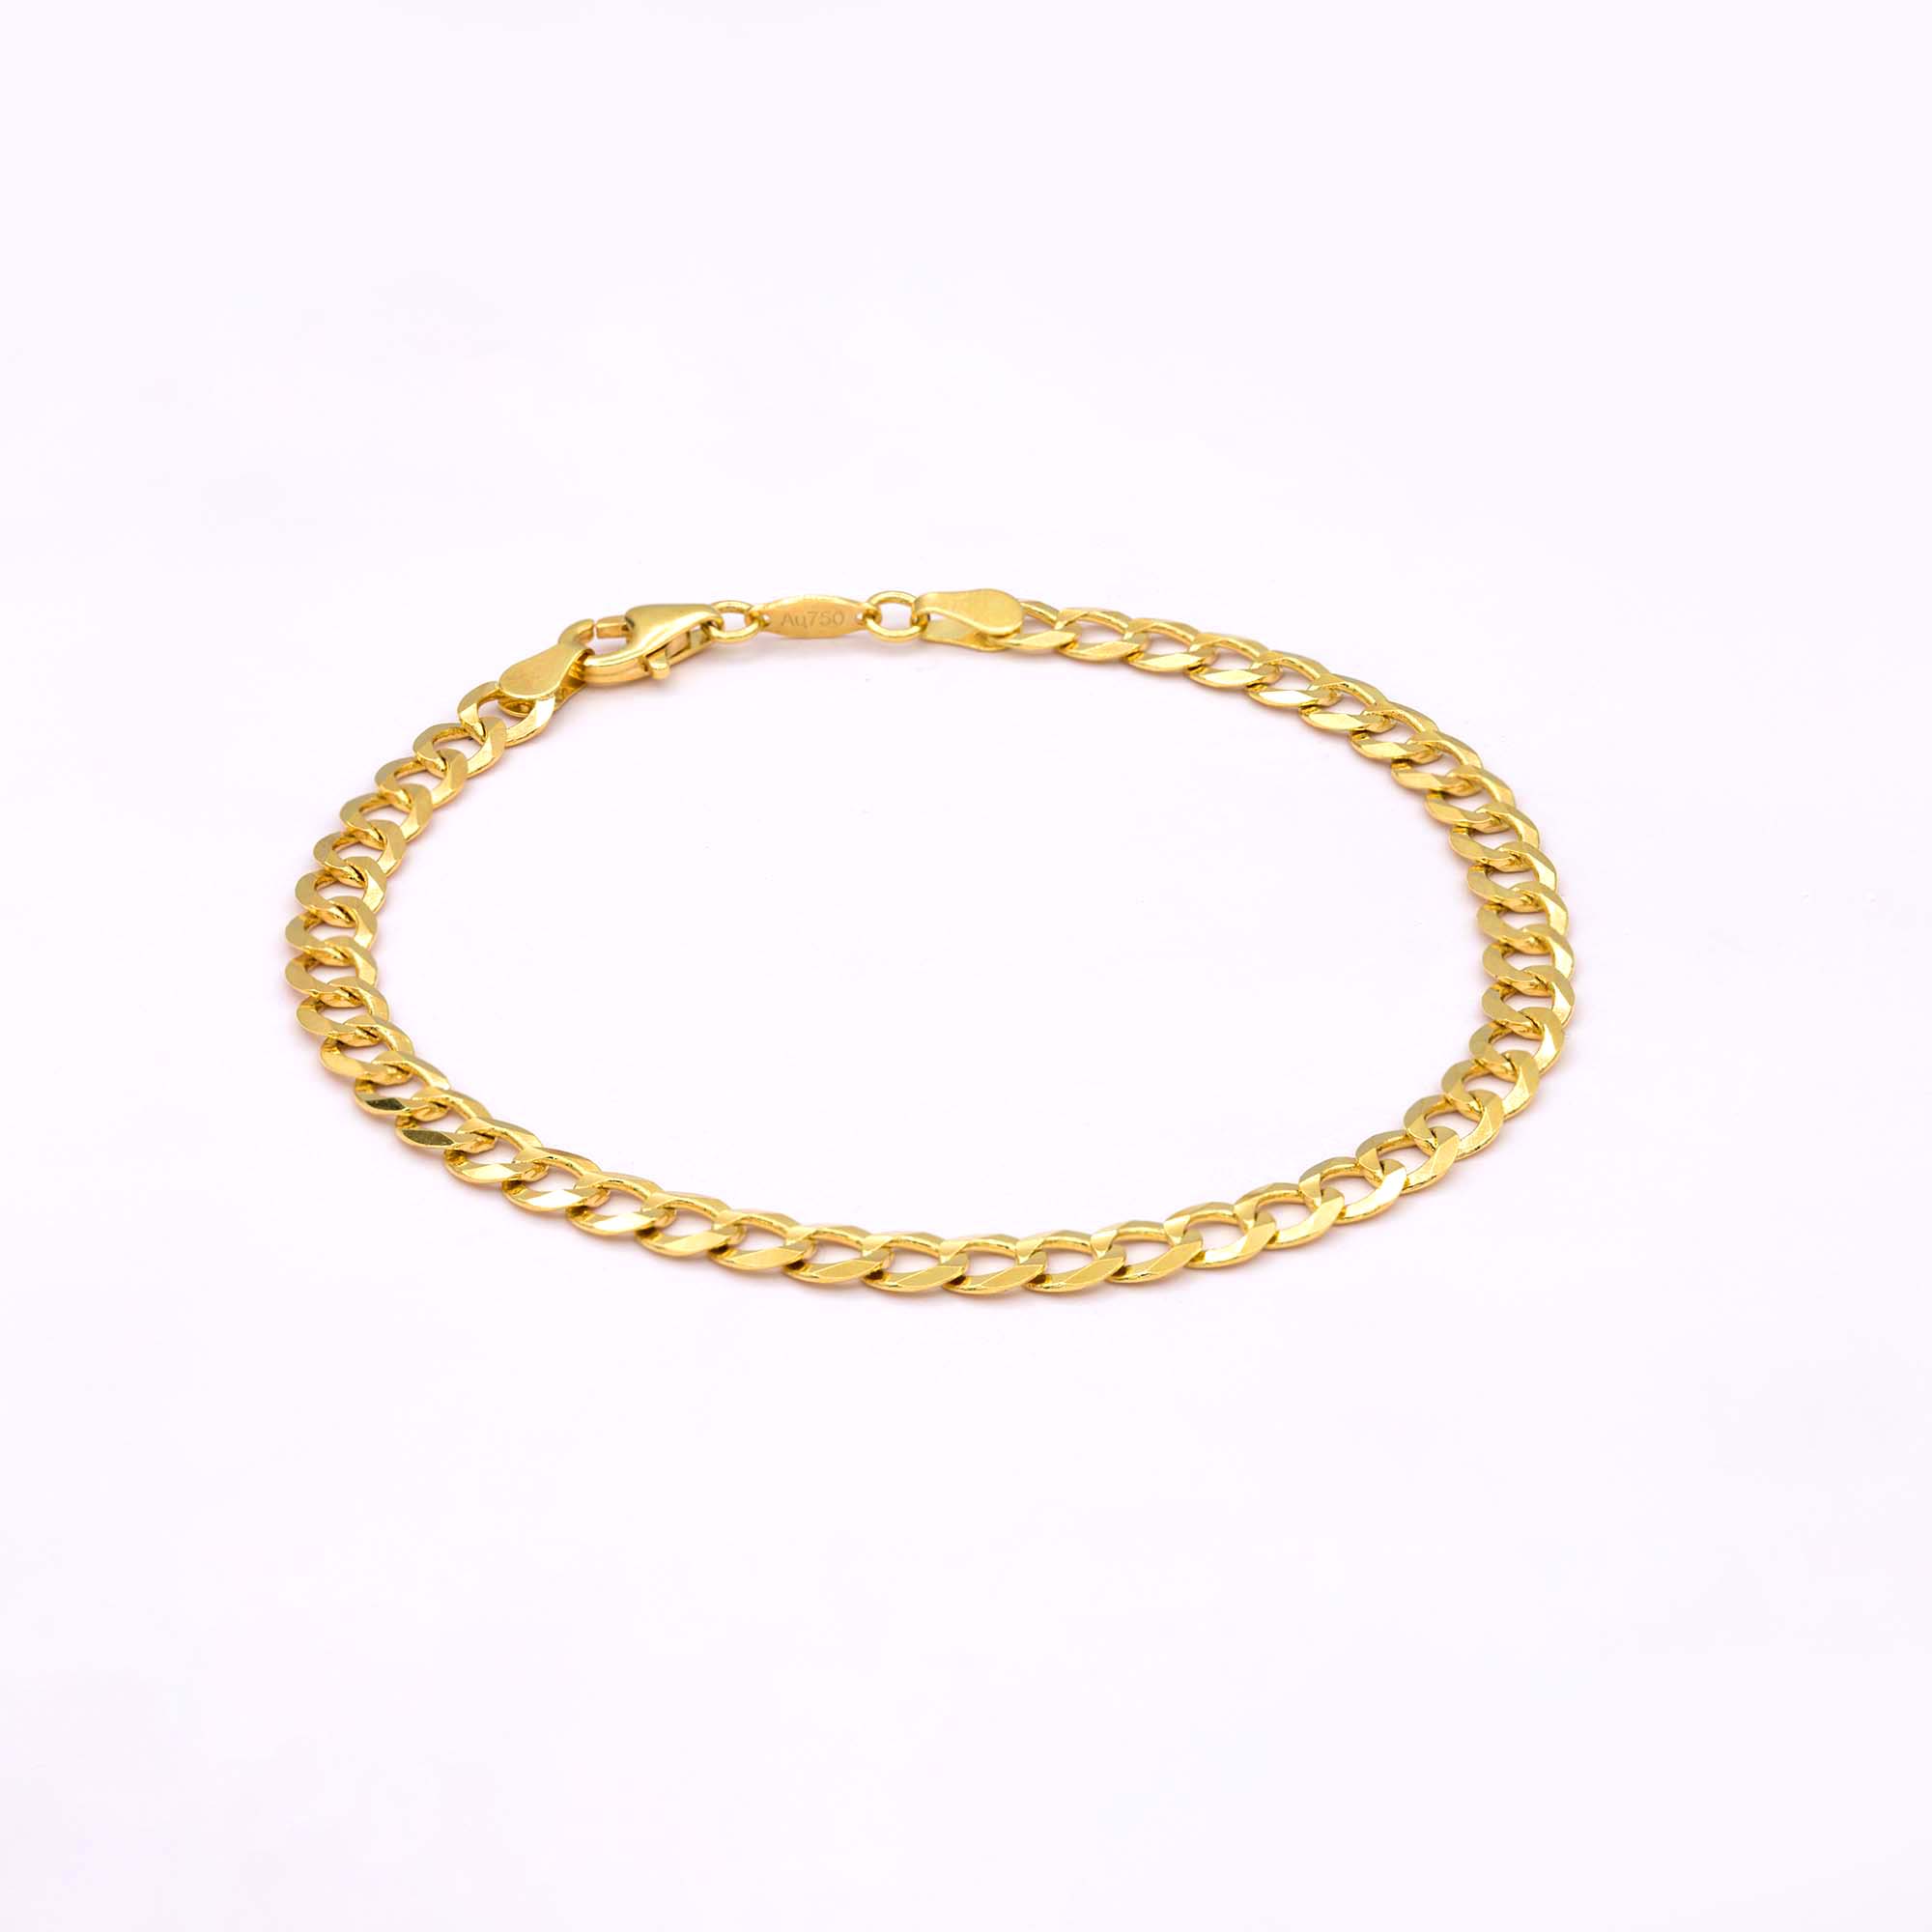 Raja Jewellers  𝙒𝙚𝙚𝙠𝙡𝙮 𝙃𝙤𝙩 𝘿𝙚𝙖𝙡𝙨 𝙅𝙪𝙨𝙩 𝙁𝙤𝙧 𝙔𝙤𝙪  22kt Gold Bracelet Starting from Rs 20600 Only on   httpswwwinfirajacomCollectiontbracelets Infinity by Raja Jewellers  Tel 071 694 8420 Emailinfoinfirajacom Offer 